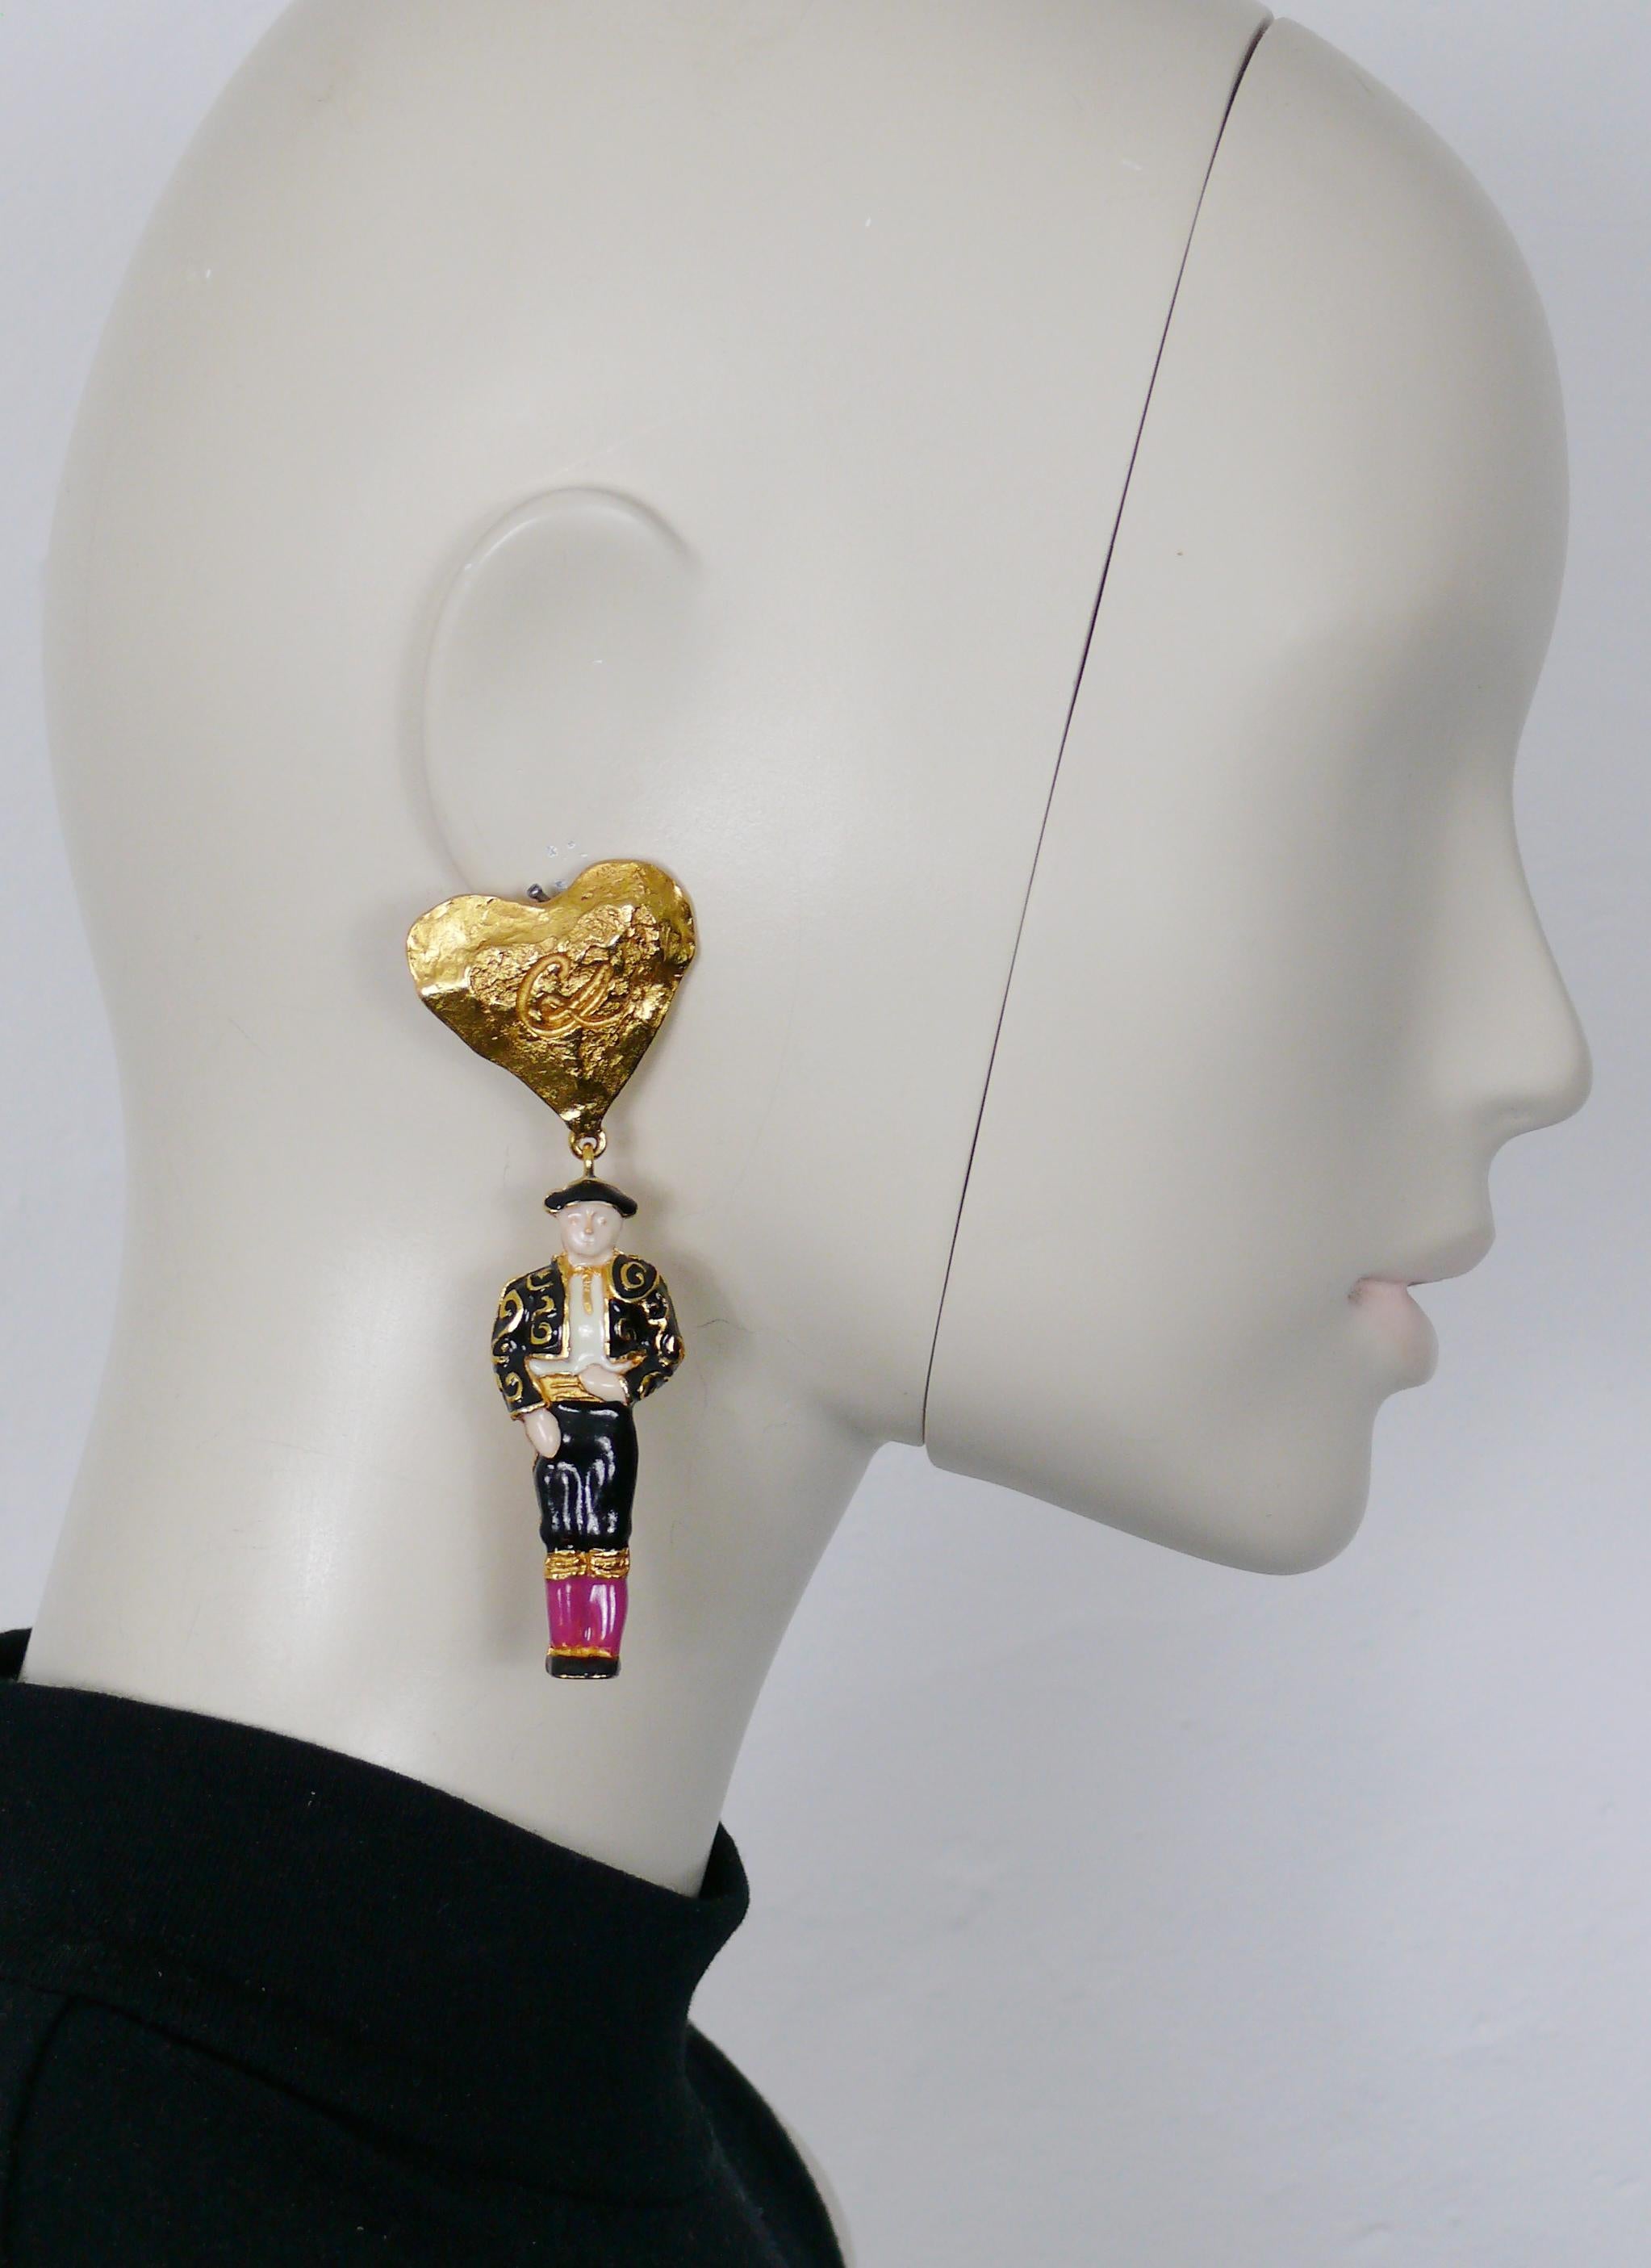 CHRISTIAN LACROIX vintage rare dangling earrings (clip-on) featuring a textured heart-shaped top embossed with a CL monogram and an enameled matador.

Marked CHRISTIAN LACROIX CL Made in France.

Indicative measurements : height approx. 9.3 cm (3.66